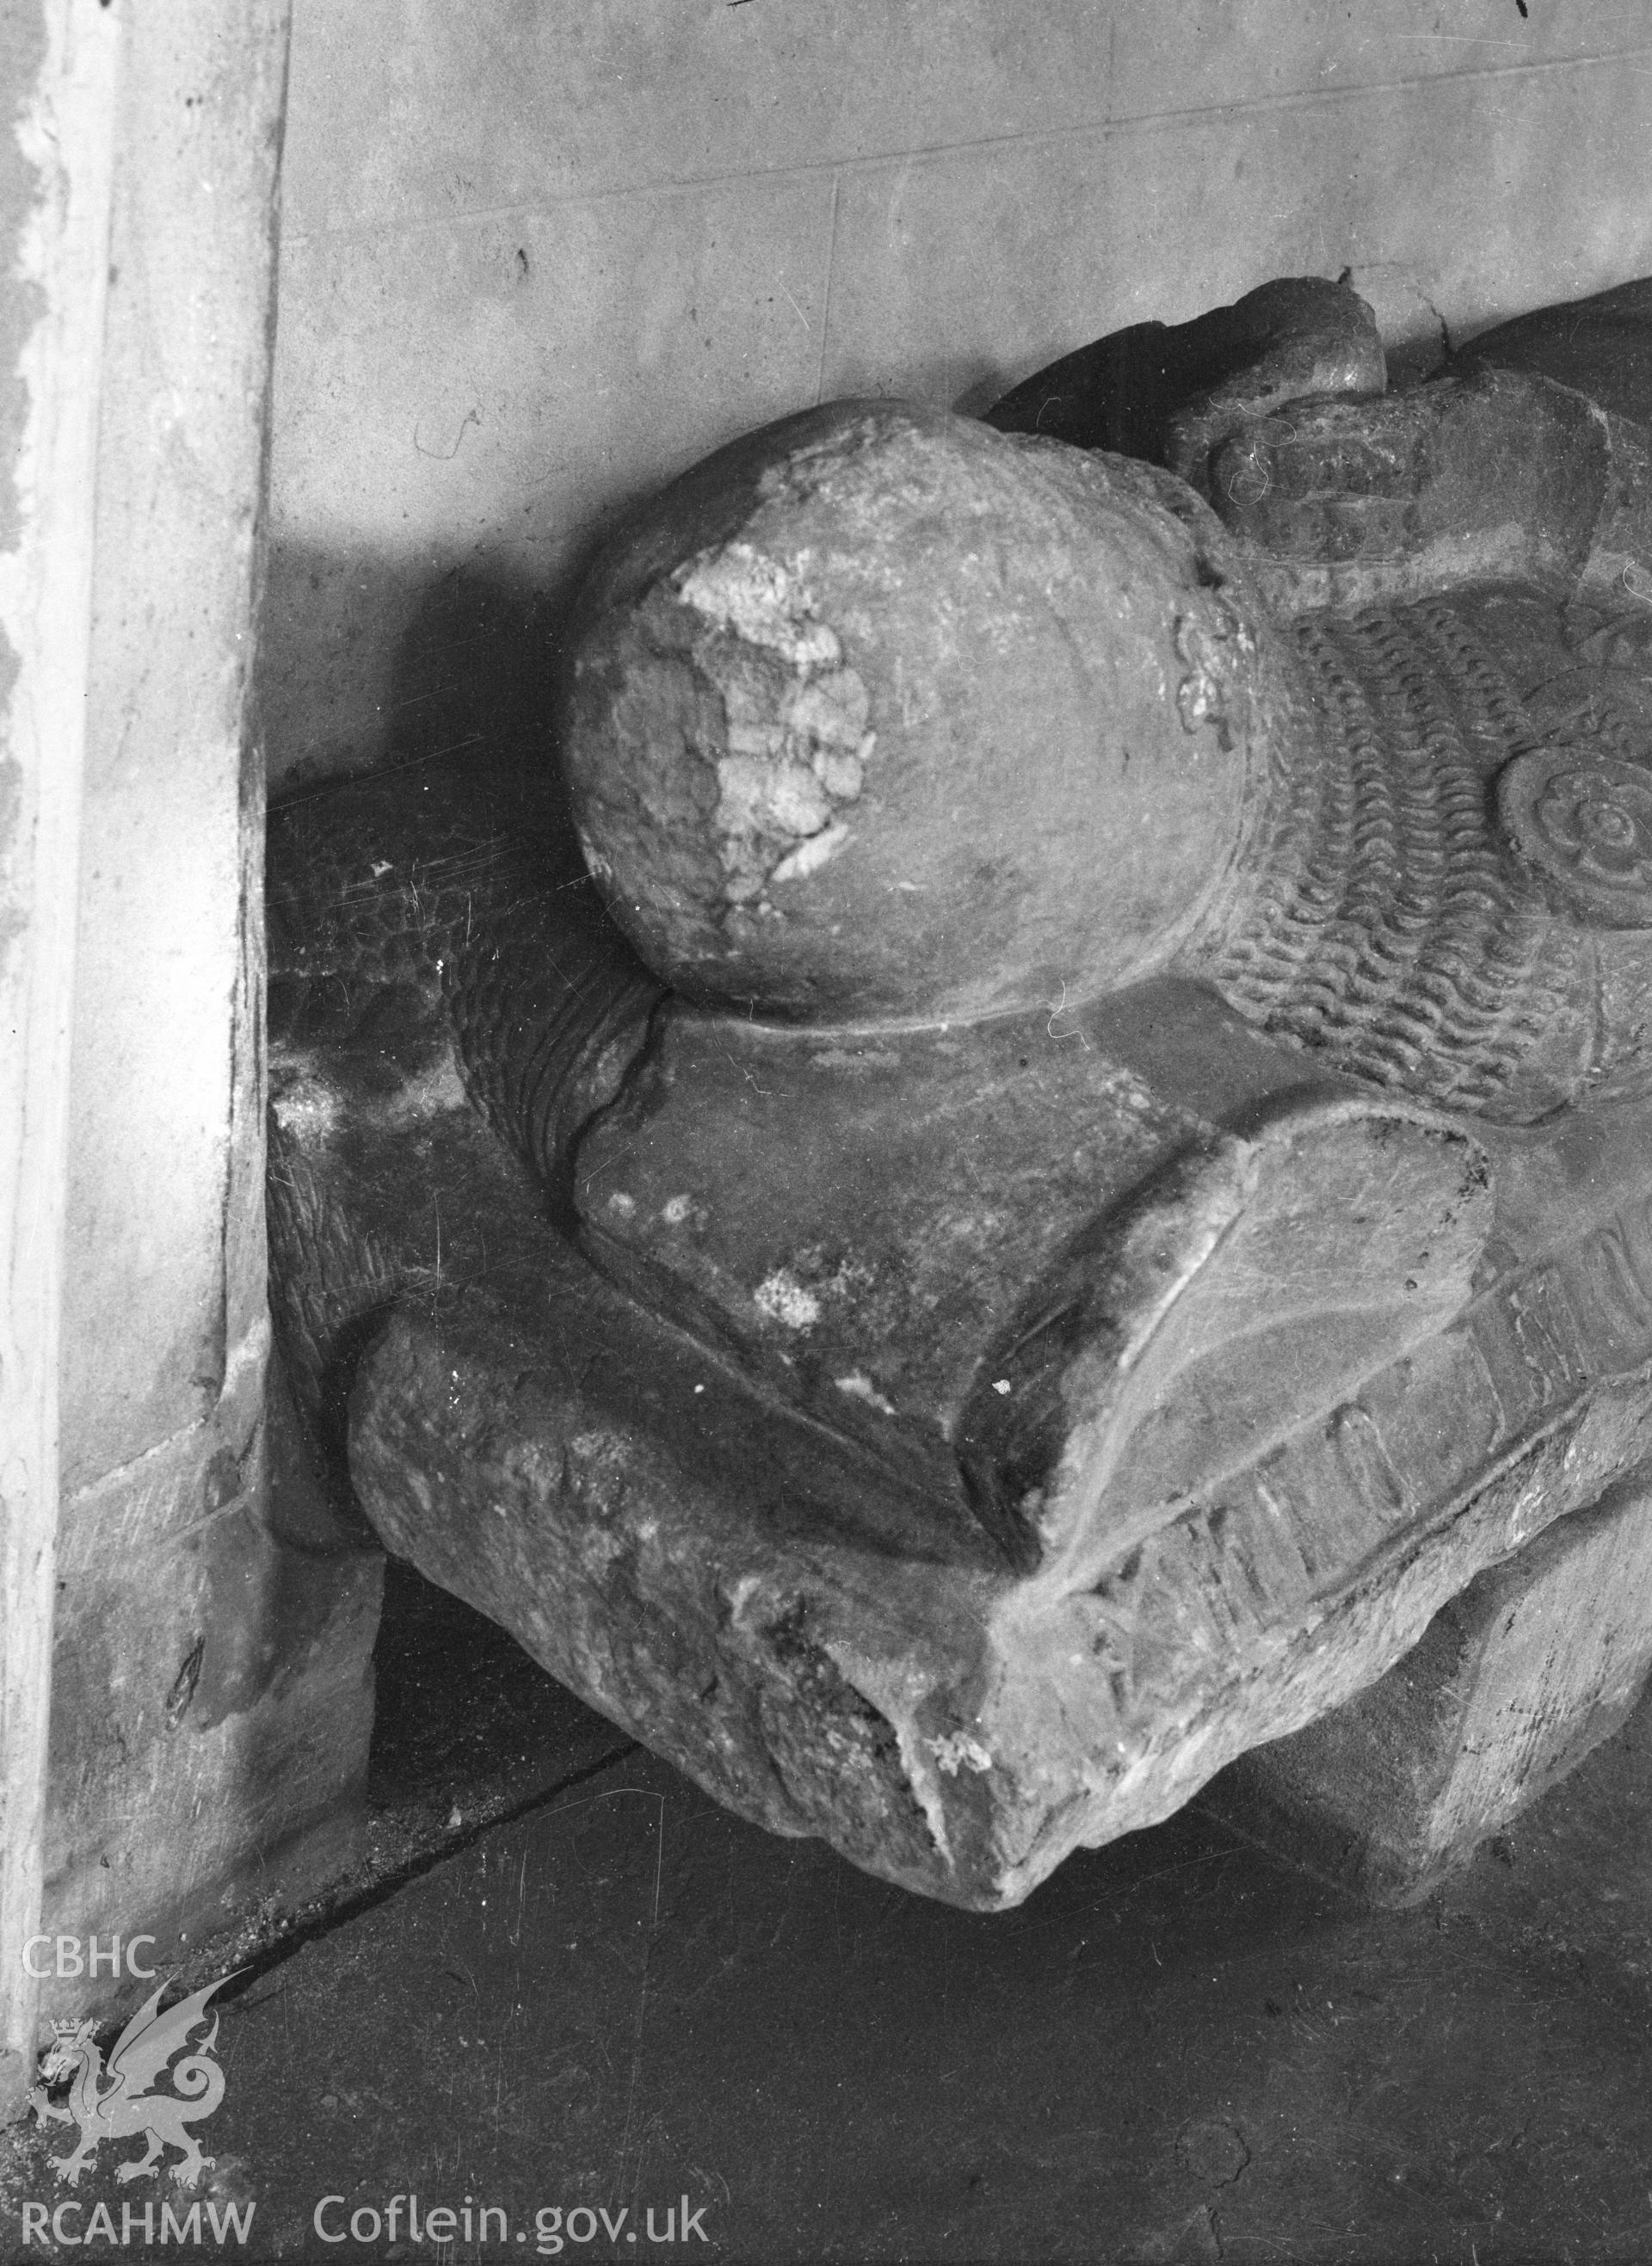 Digital copy of a nitrate negative showing effigy in Betws-y-Coed parish church. From the Cadw Monuments in Care Collection.